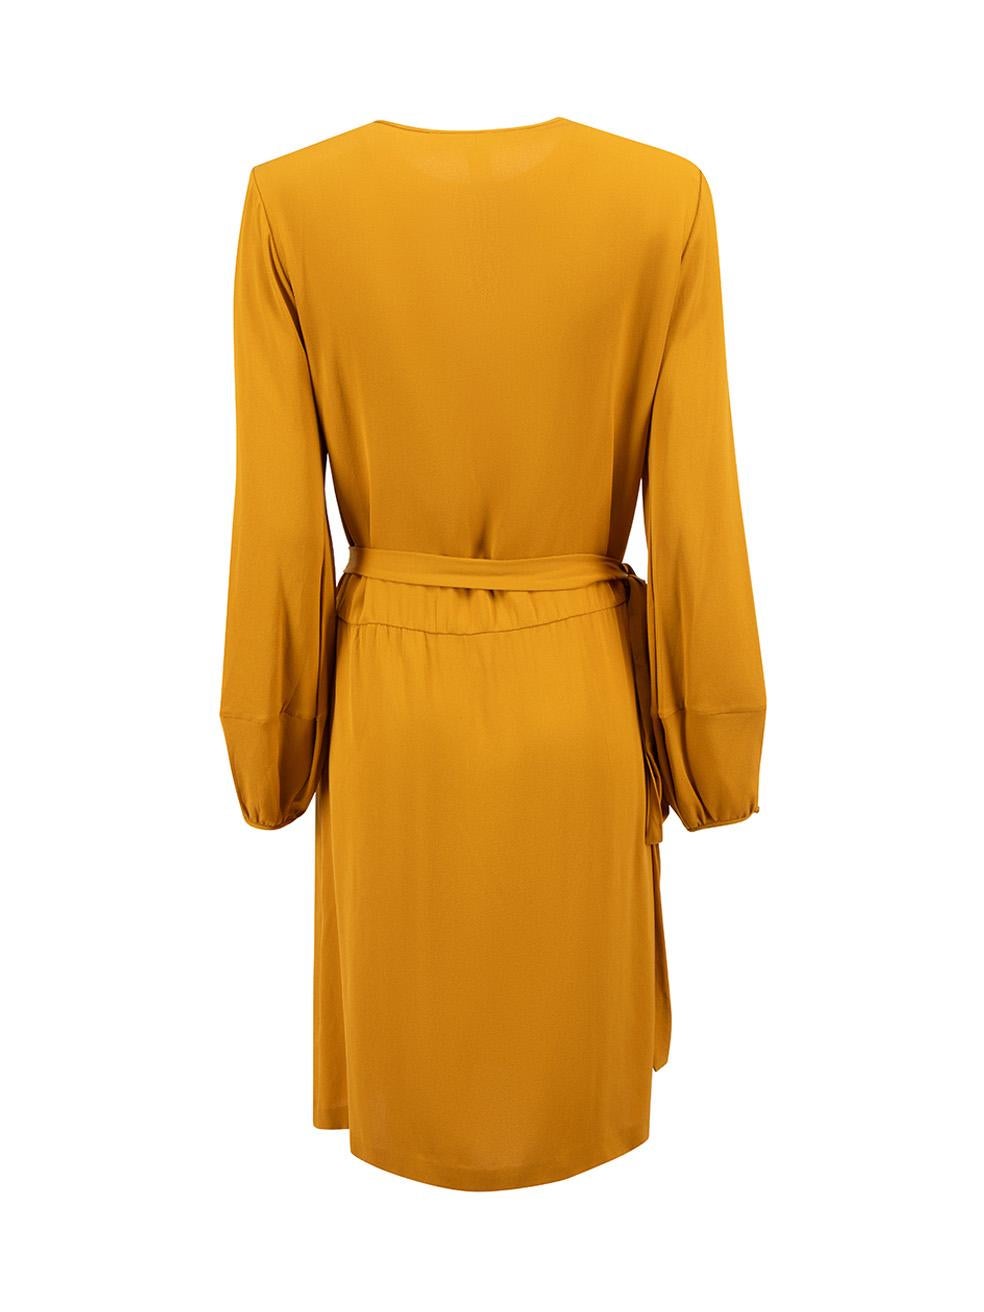 Camel Round Neck Wrap Dress Size XL In Good Condition For Sale In London, GB